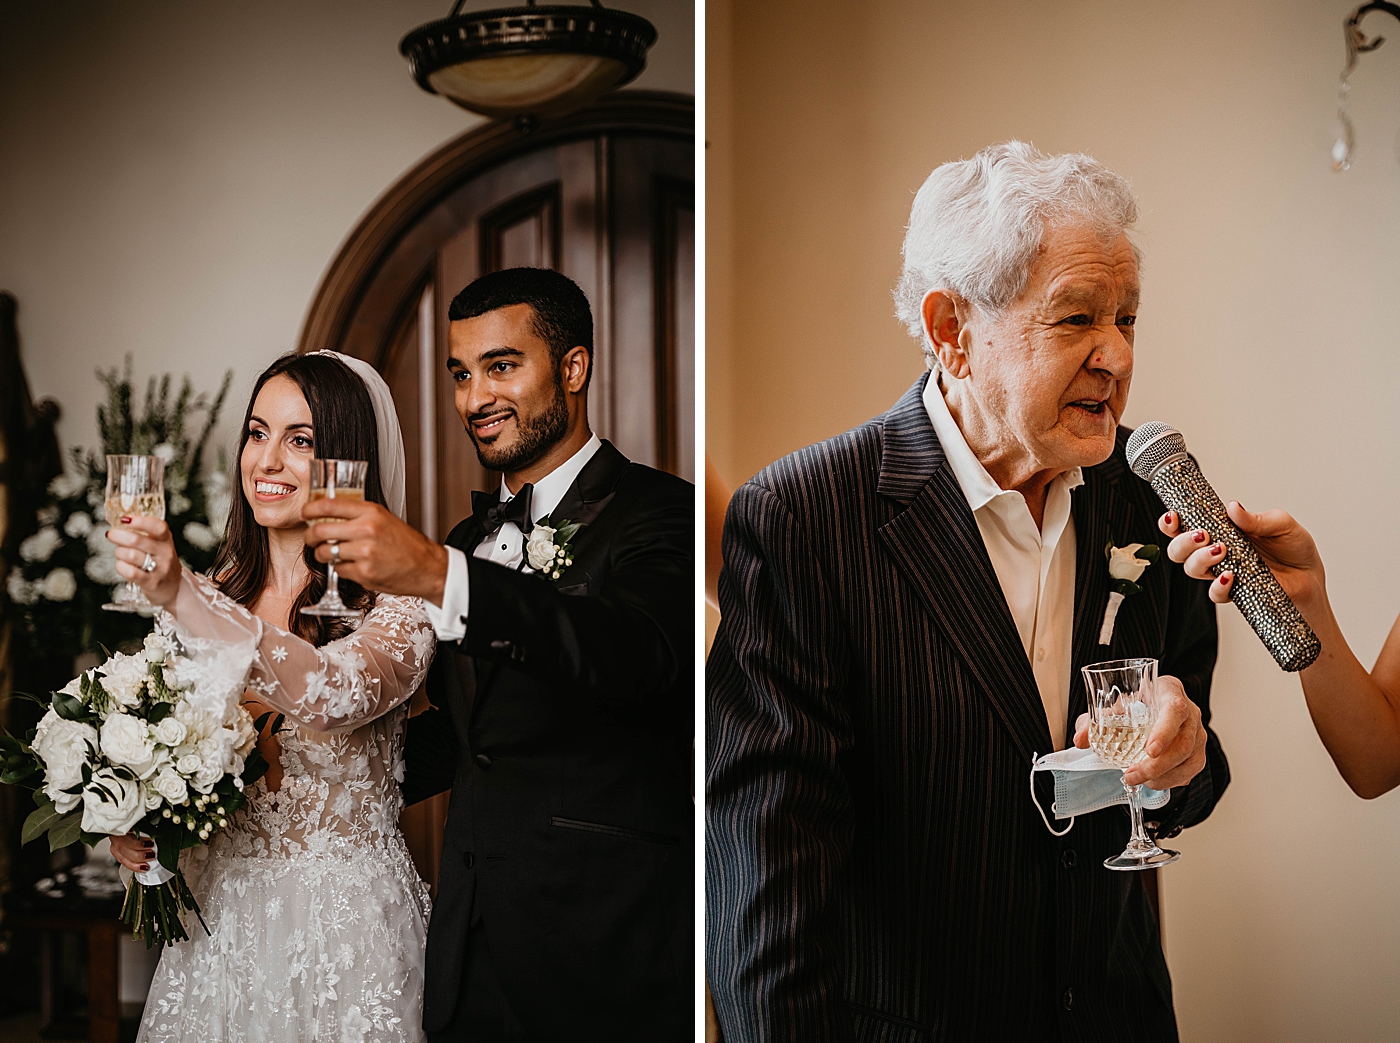 Cheers and family Intimate Home Wedding captured by South Florida Wedding Photographer Krystal Capone Photography